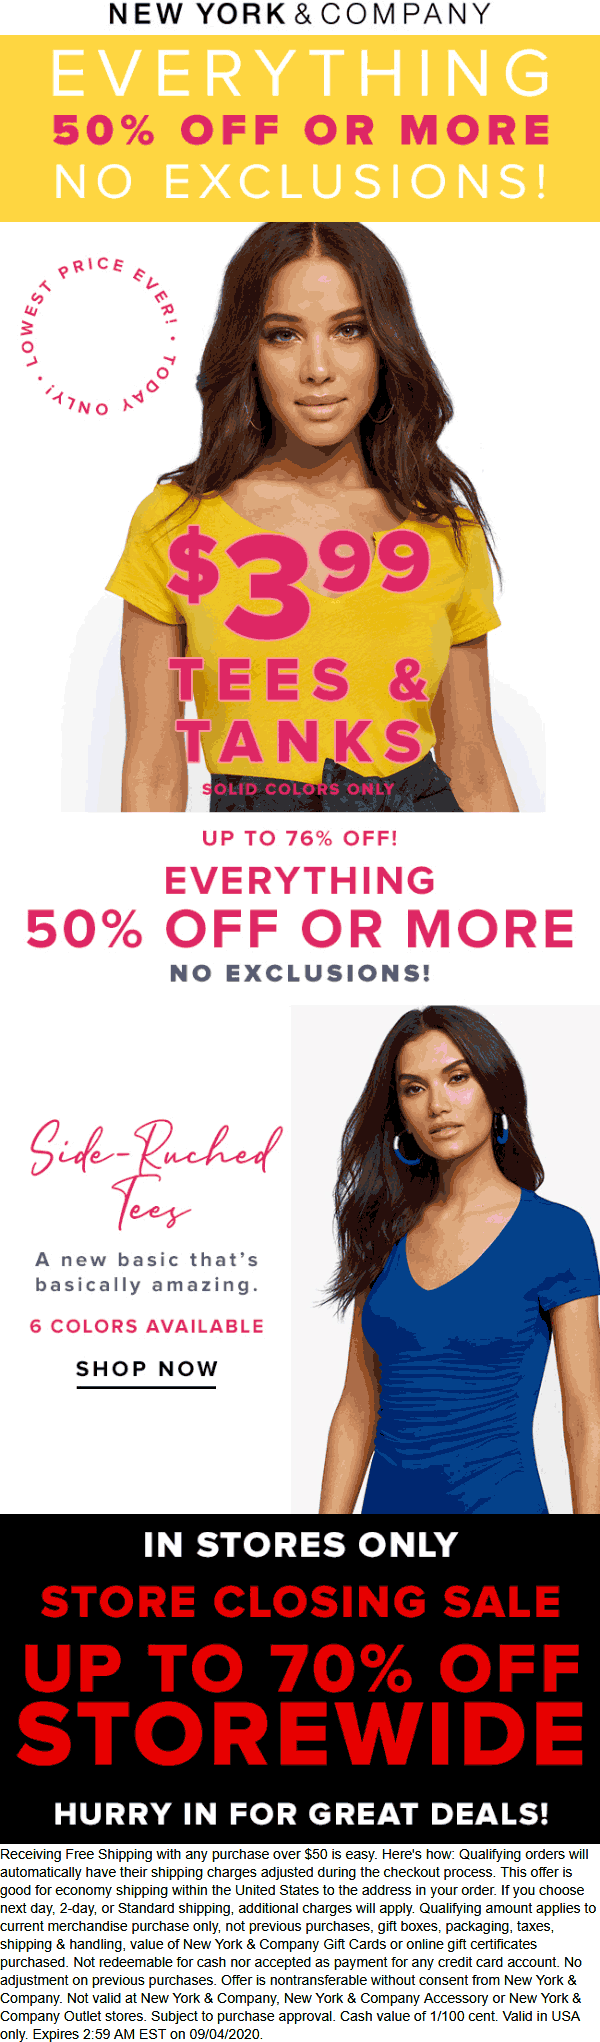 New York & Company stores Coupon  50% off everything online at New York & Company + 70% off store closing sales in-store #newyorkcompany 